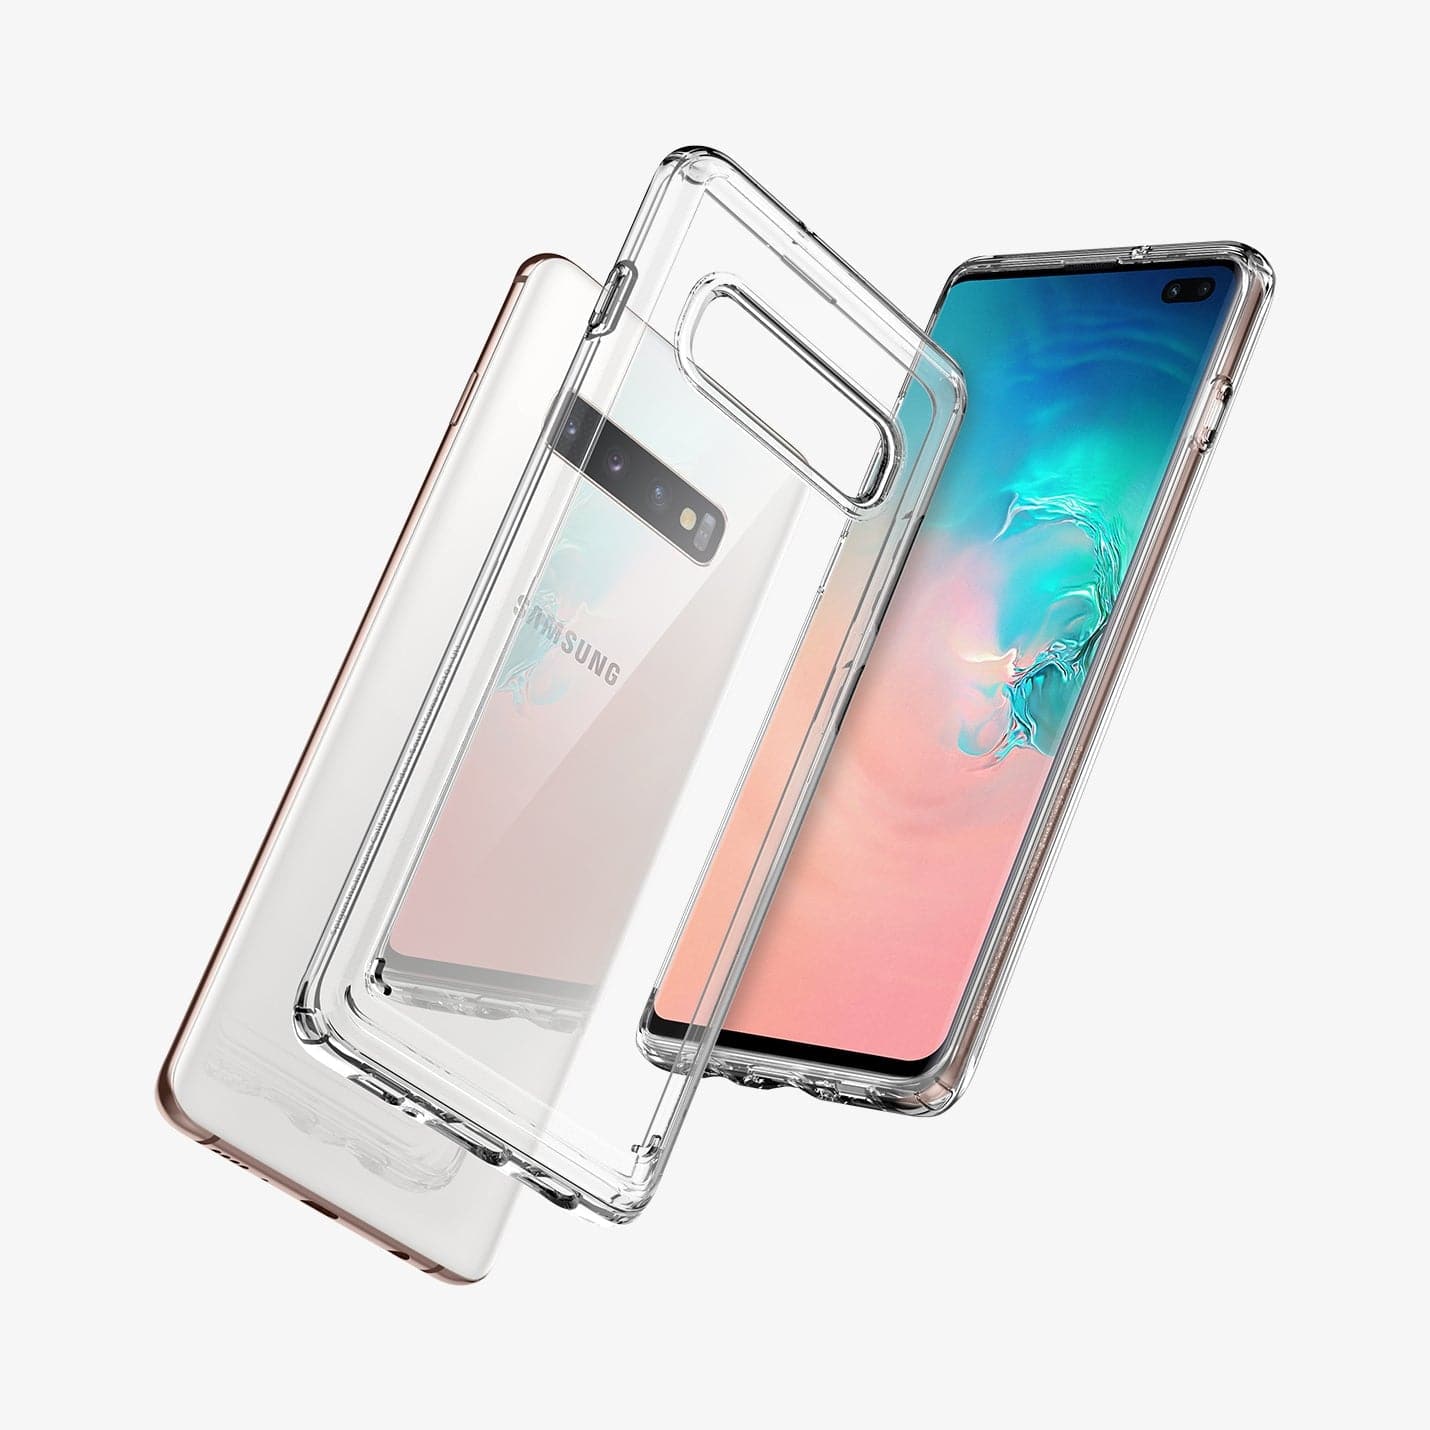 606CS25766 - Galaxy S10 Plus Ultra Hybrid Case in crystal clear showing the back, front and sides